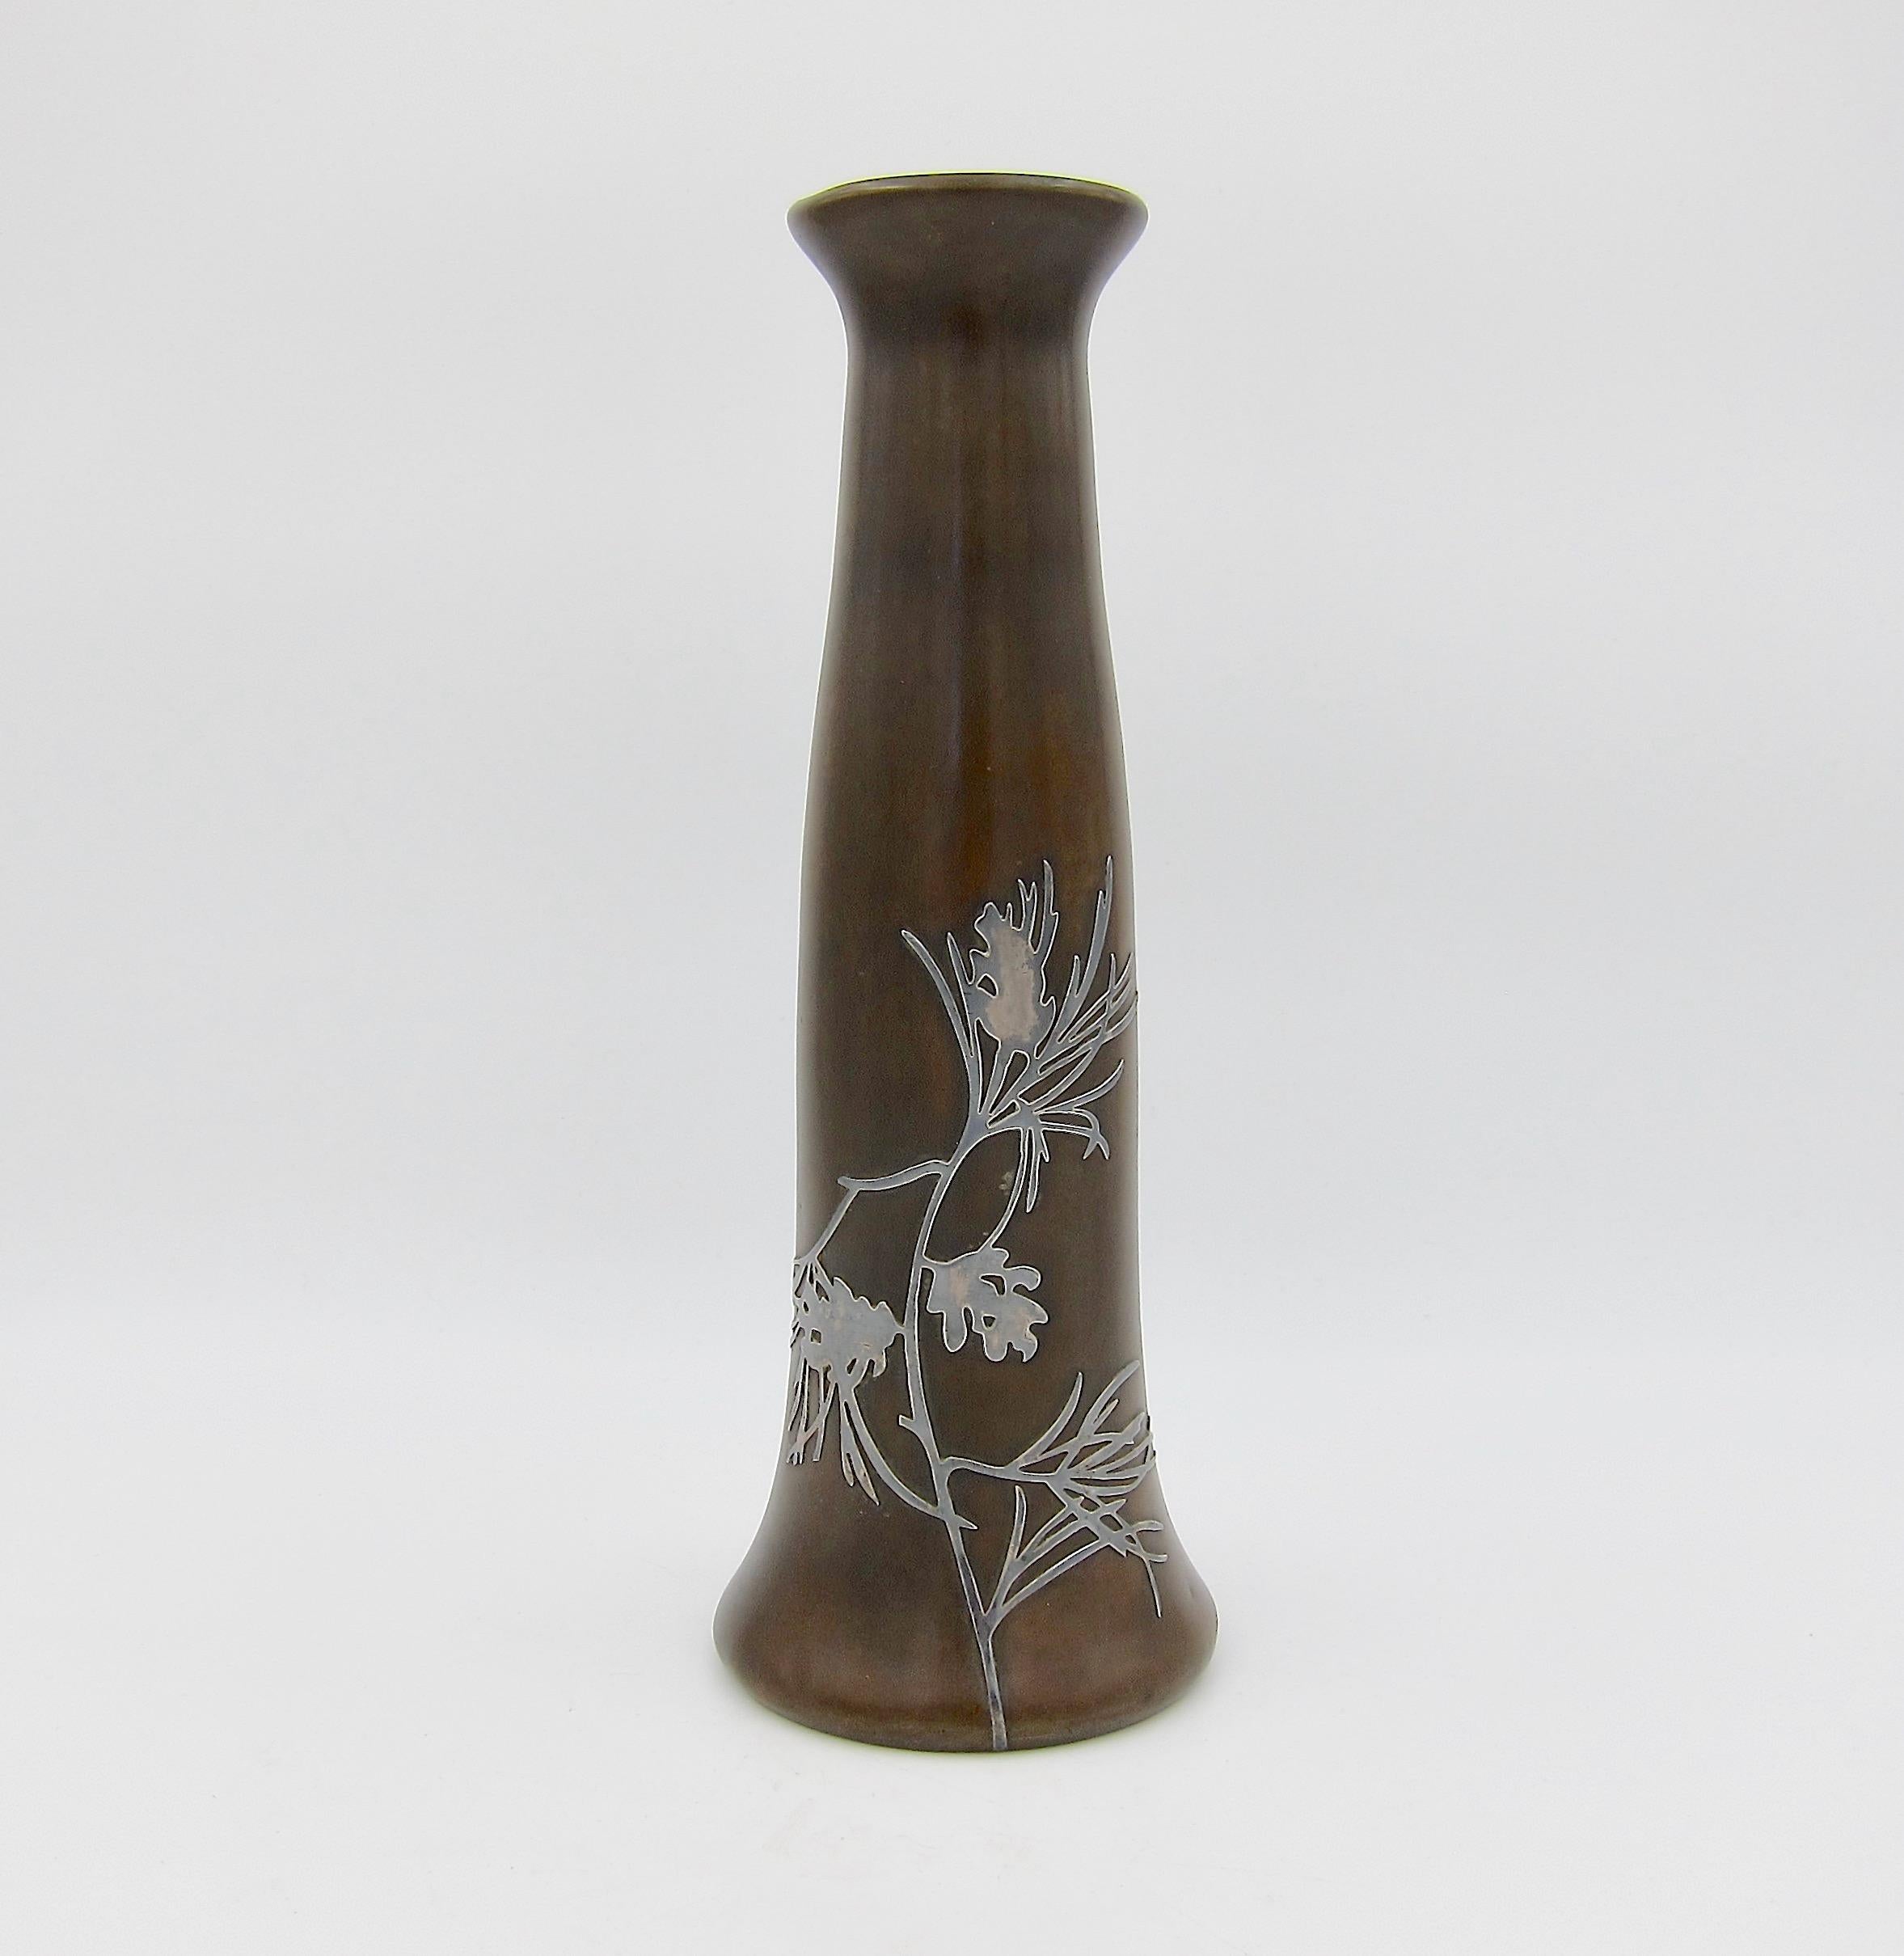 An American Arts & Crafts bronze vase with a sterling silver pine branch overlay from Heintz Art Metal Shop of Buffalo, New York, dating circa 1915. The vase has a tapering cylindrical body with a flared base and mouth and a rich brown patina